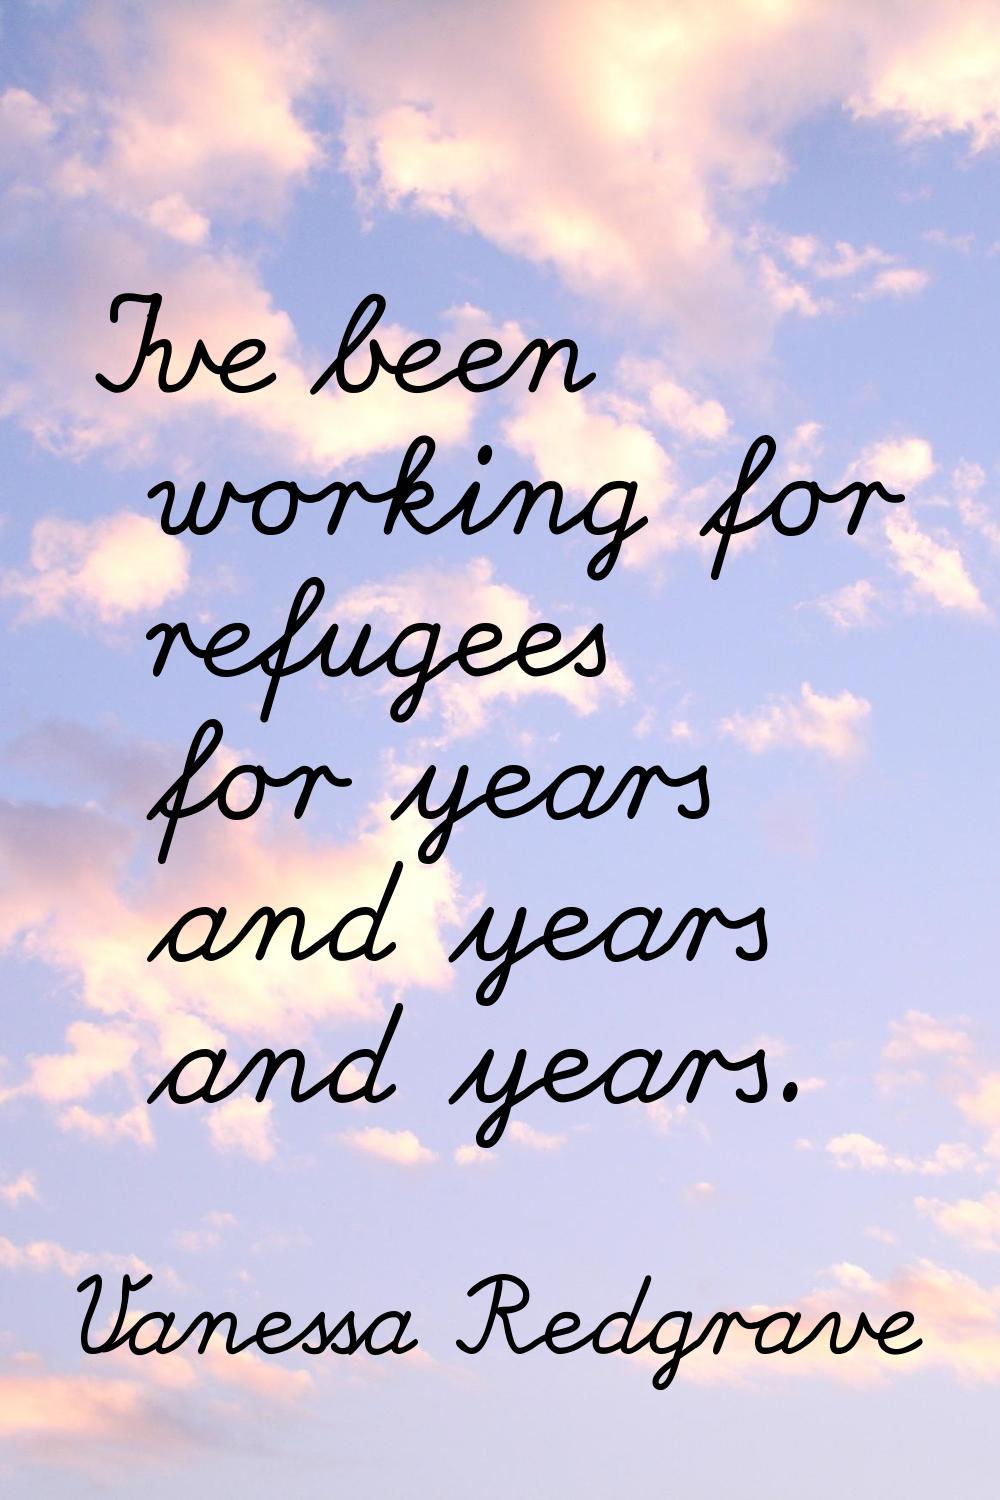 I've been working for refugees for years and years and years.